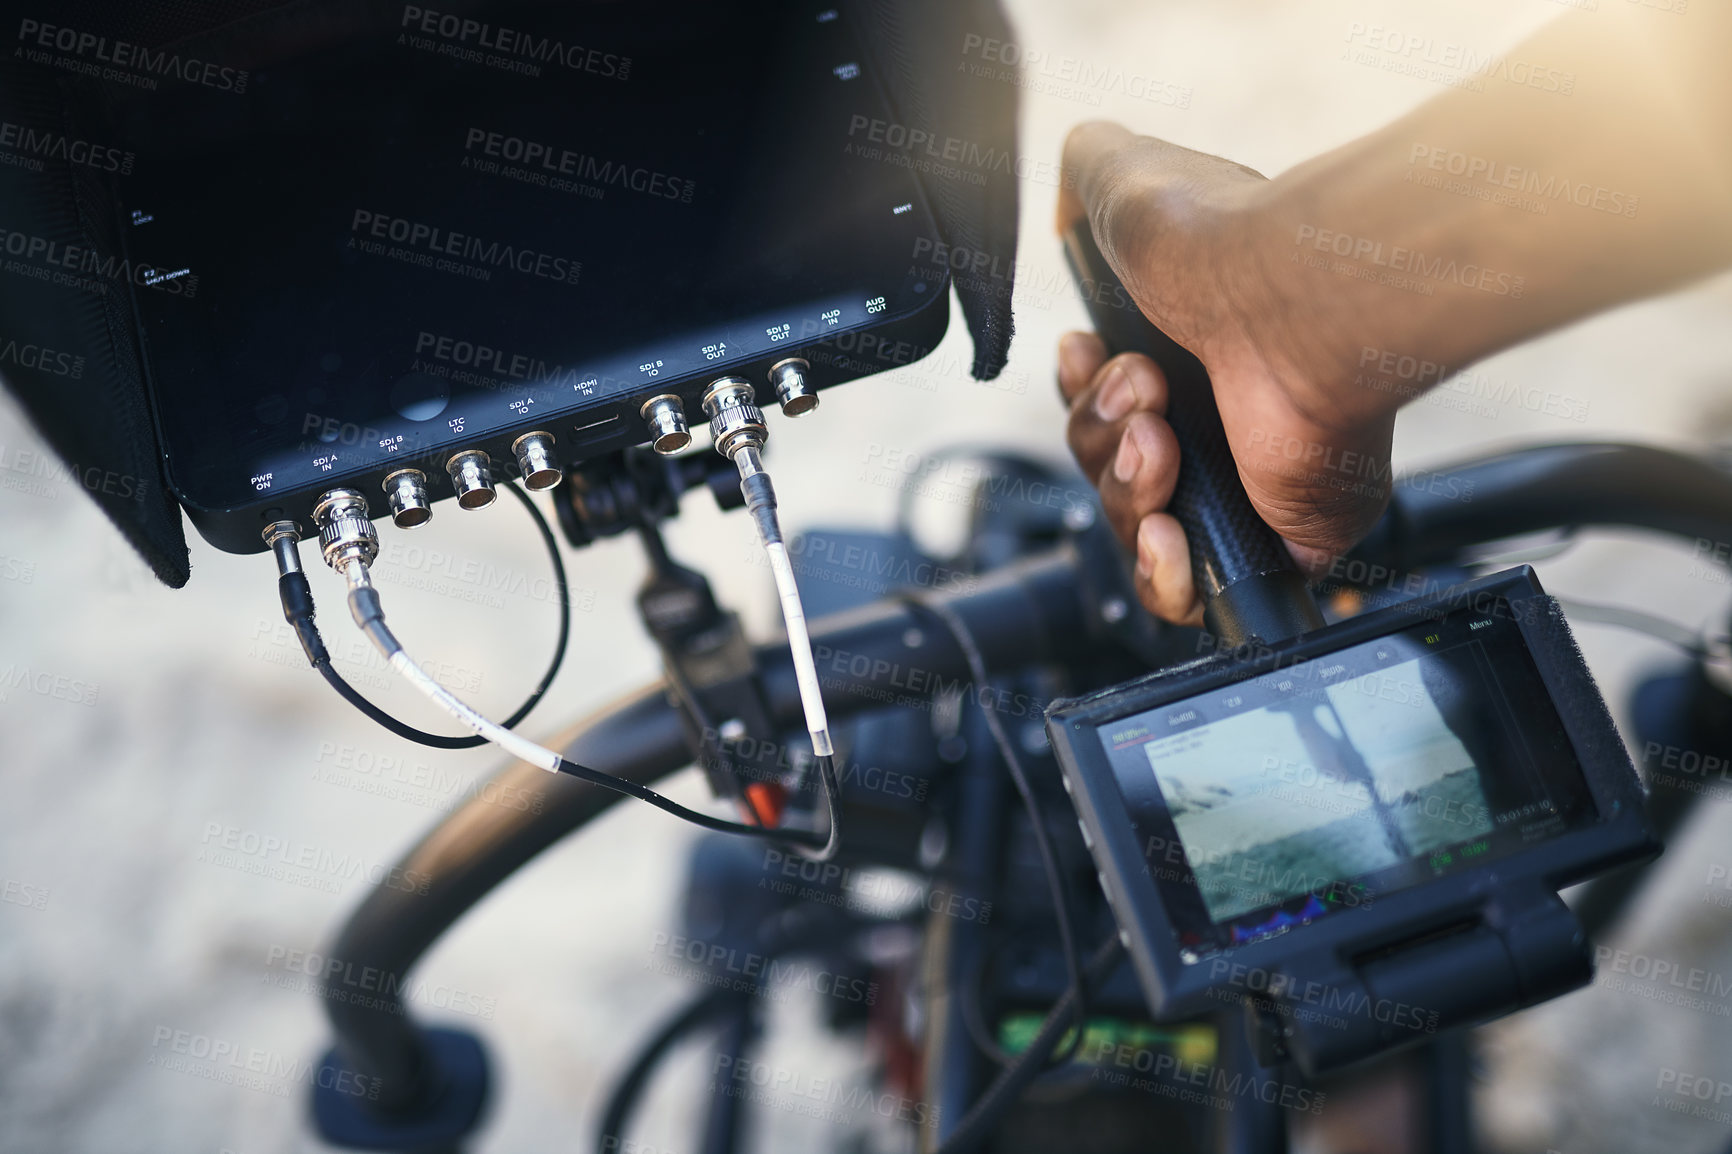 Buy stock photo Closeup of an unrecognizable person holding a state of the art video camera outside on a beach during the day